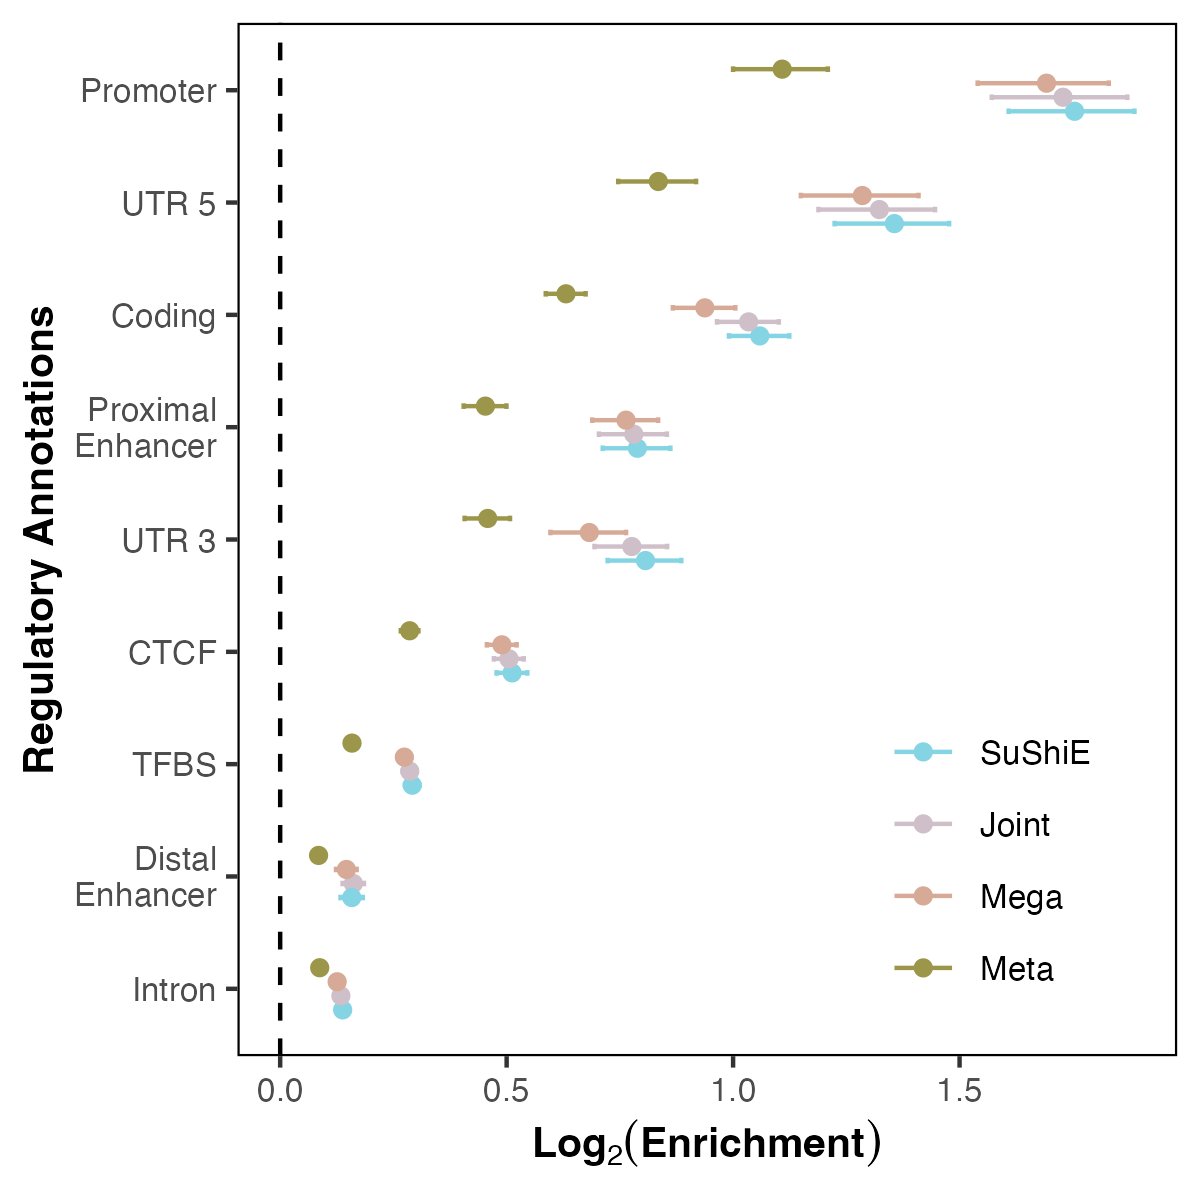 We apply SuShiE to gene expression data from 372 EURs and 441 AFRs in GENOA and compare it to the current methods that assume no correlation priors. The posterior inclusion probability by SuShiE is more enriched in the regulatory annotations.  (6/8)